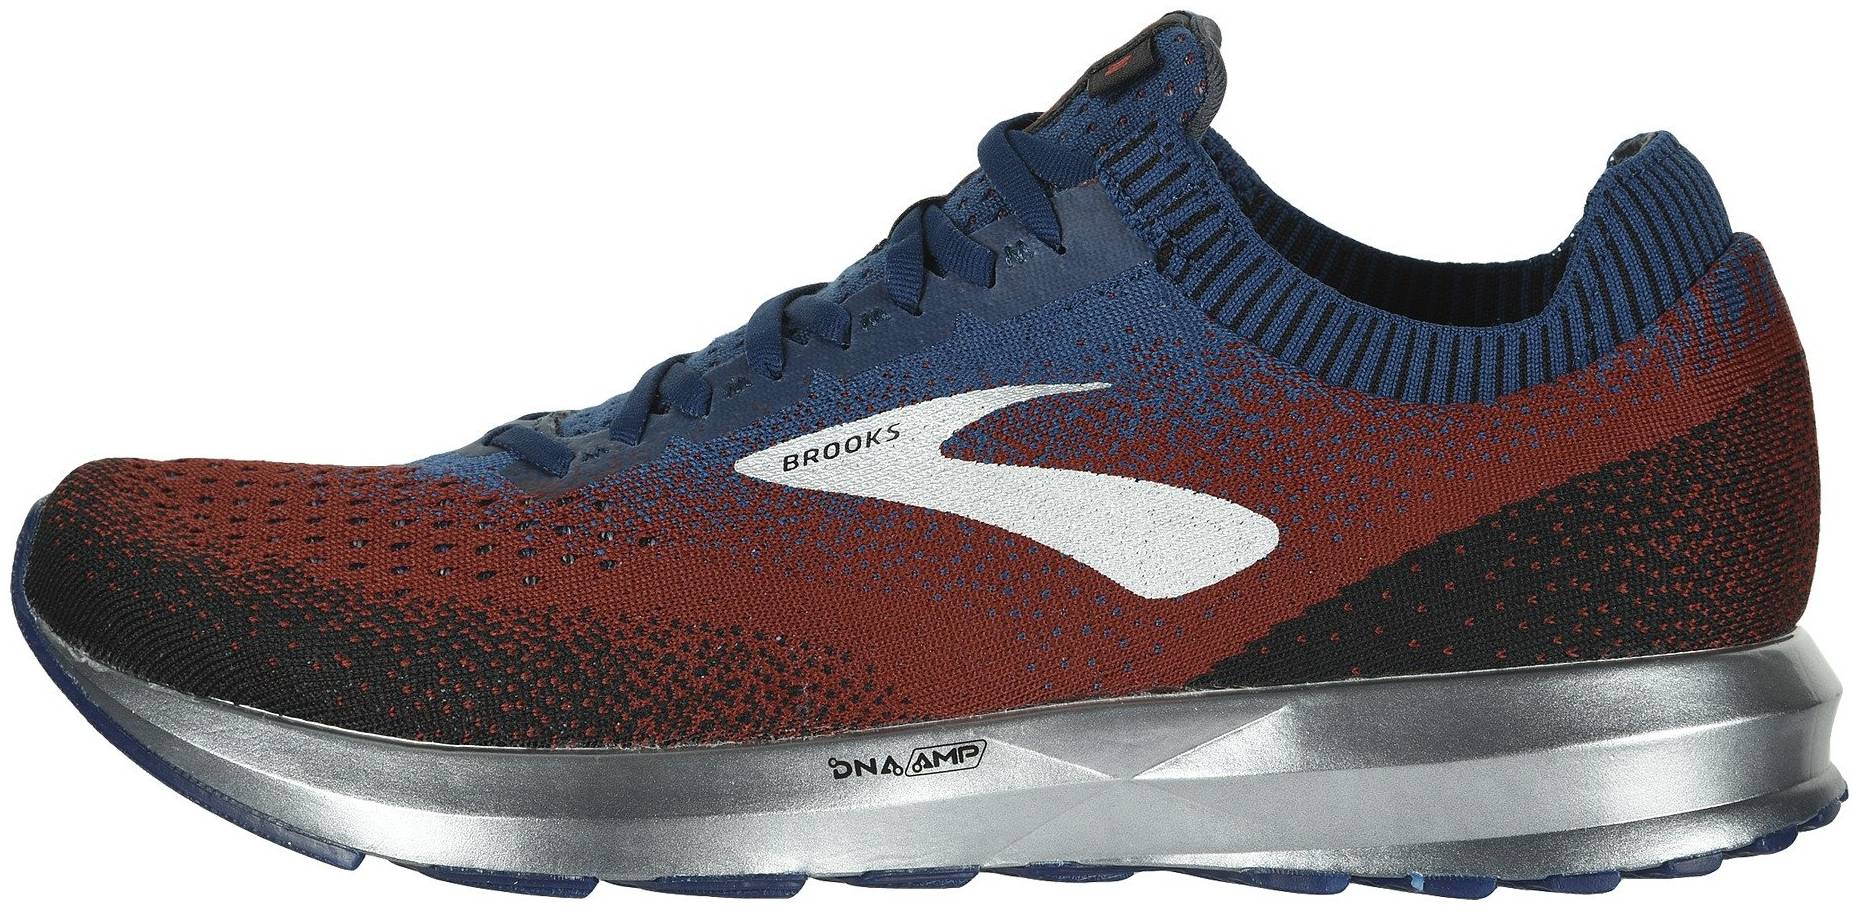 Save 18% on Red Brooks Running Shoes 